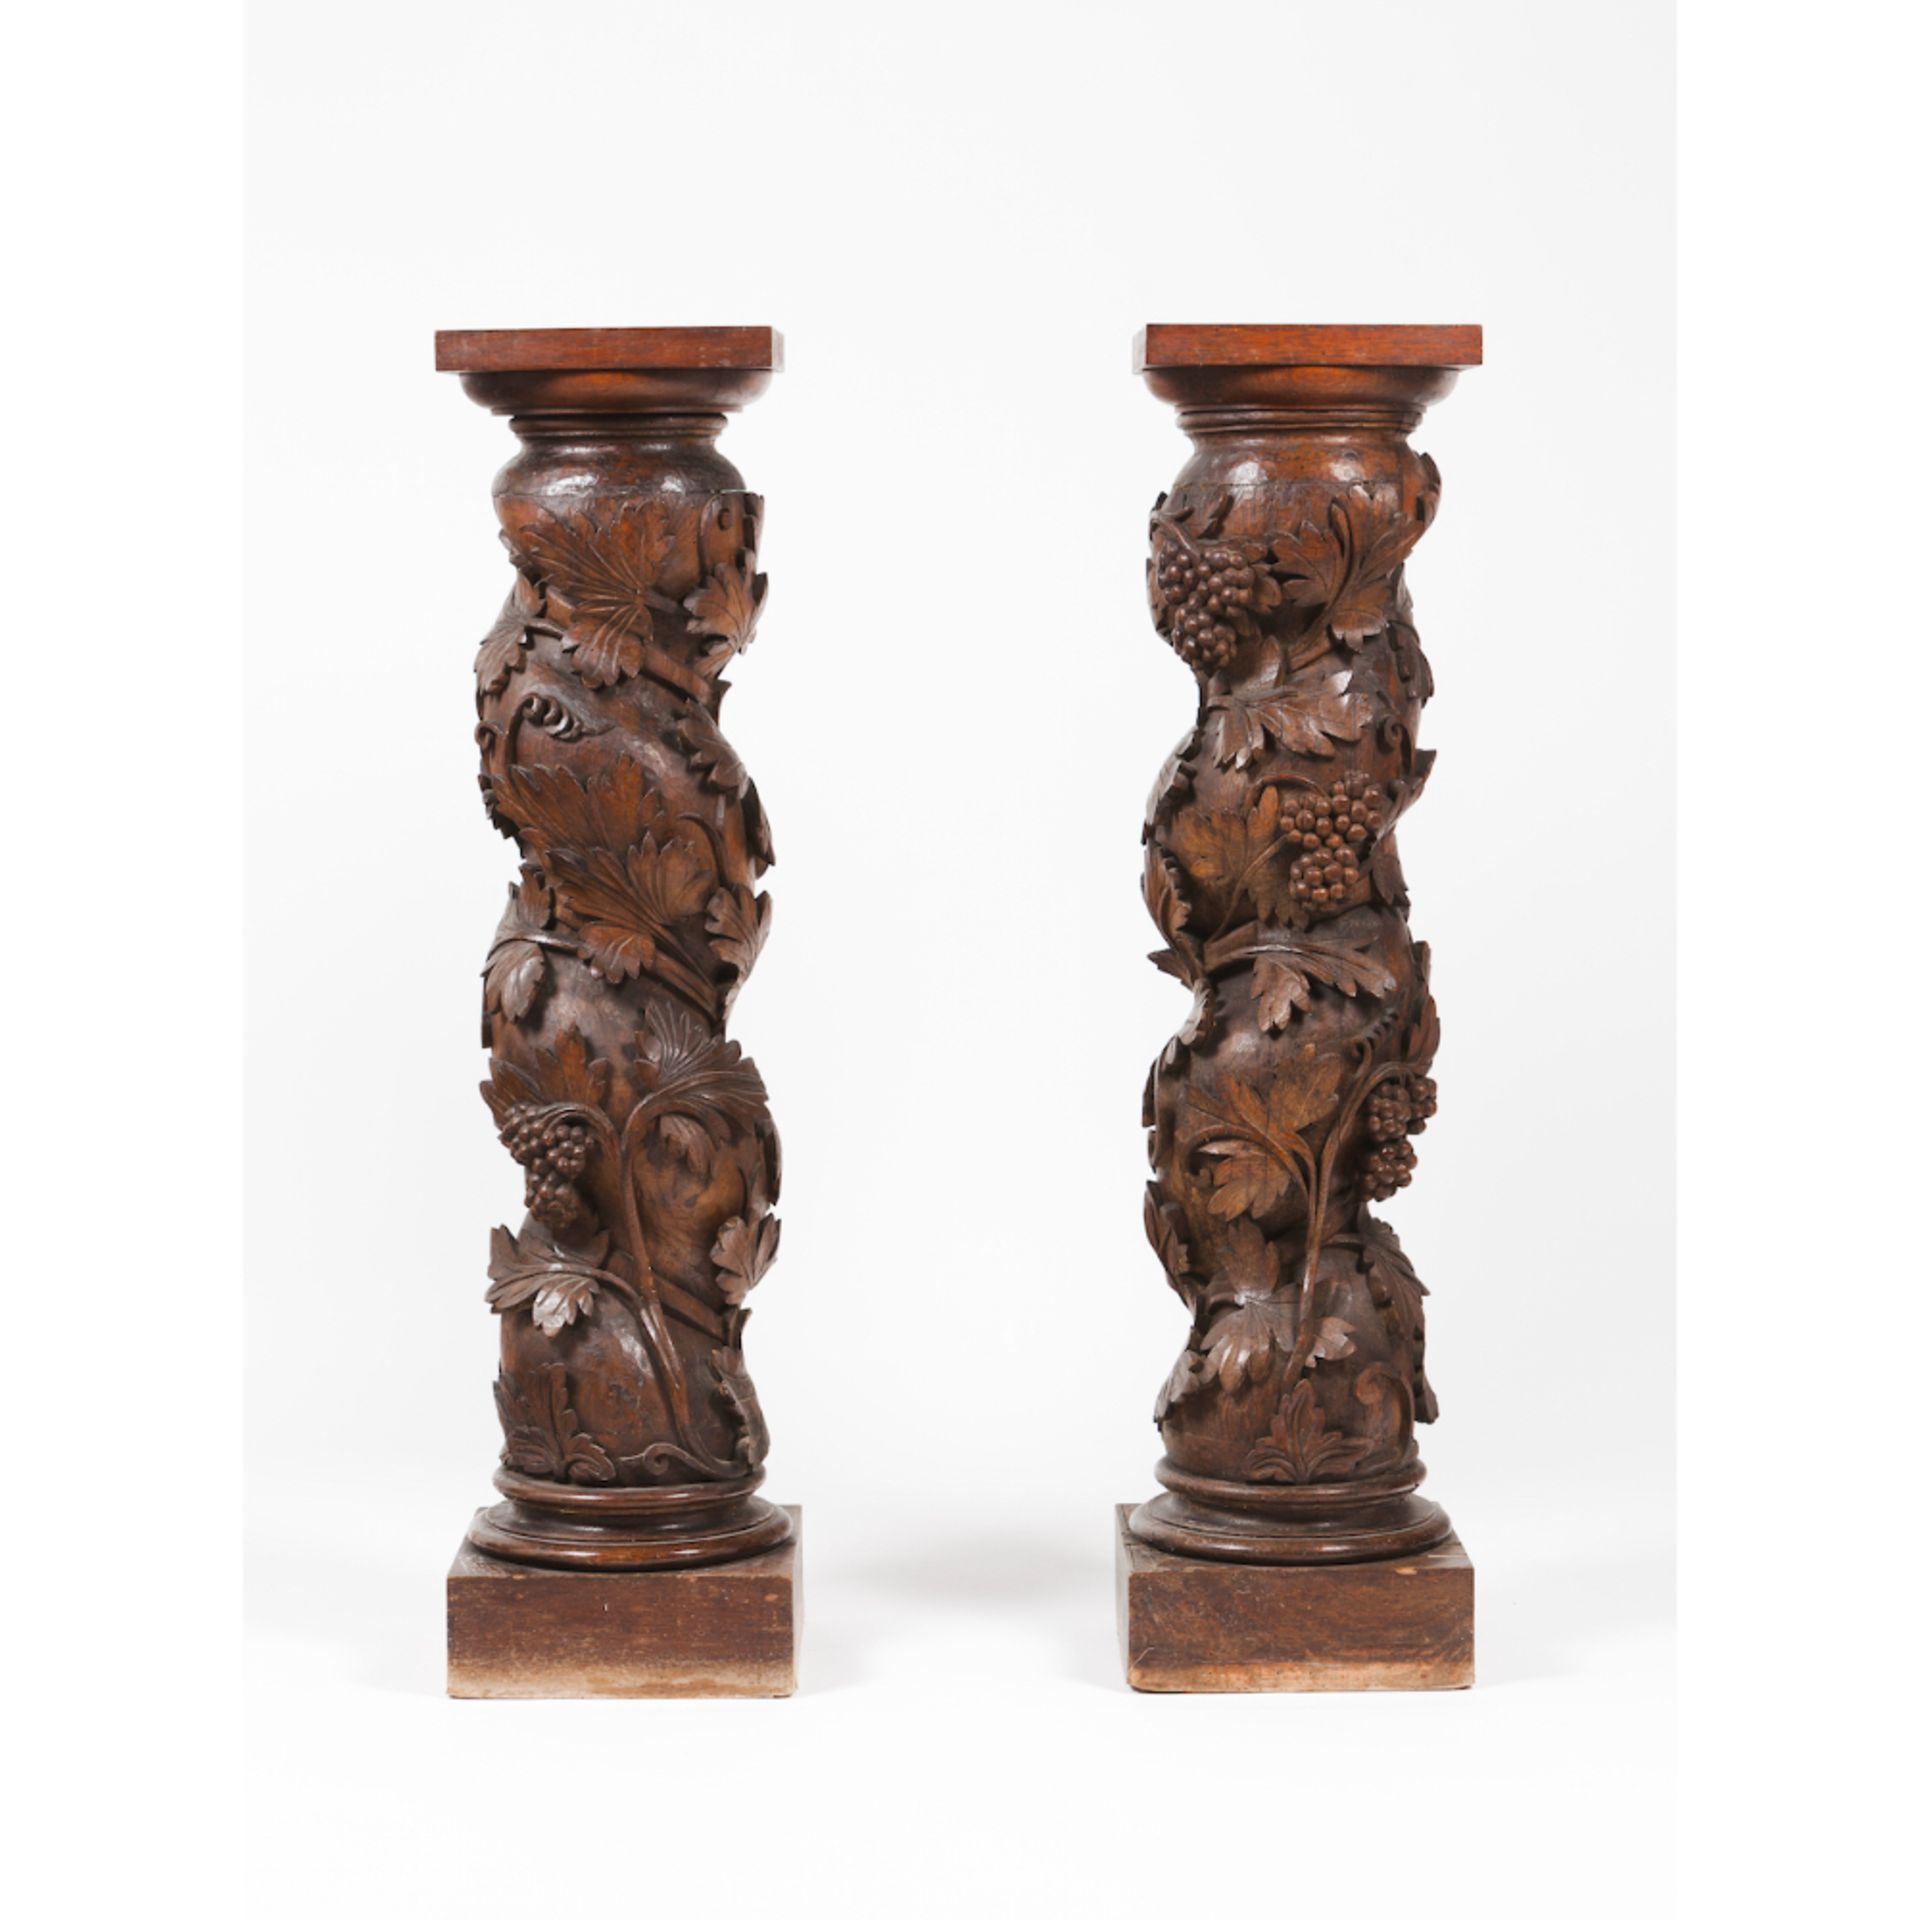 A pair of pseudo-Solomonic columnsChestnut Foliage and grapes carved decoration Portugal, 18th